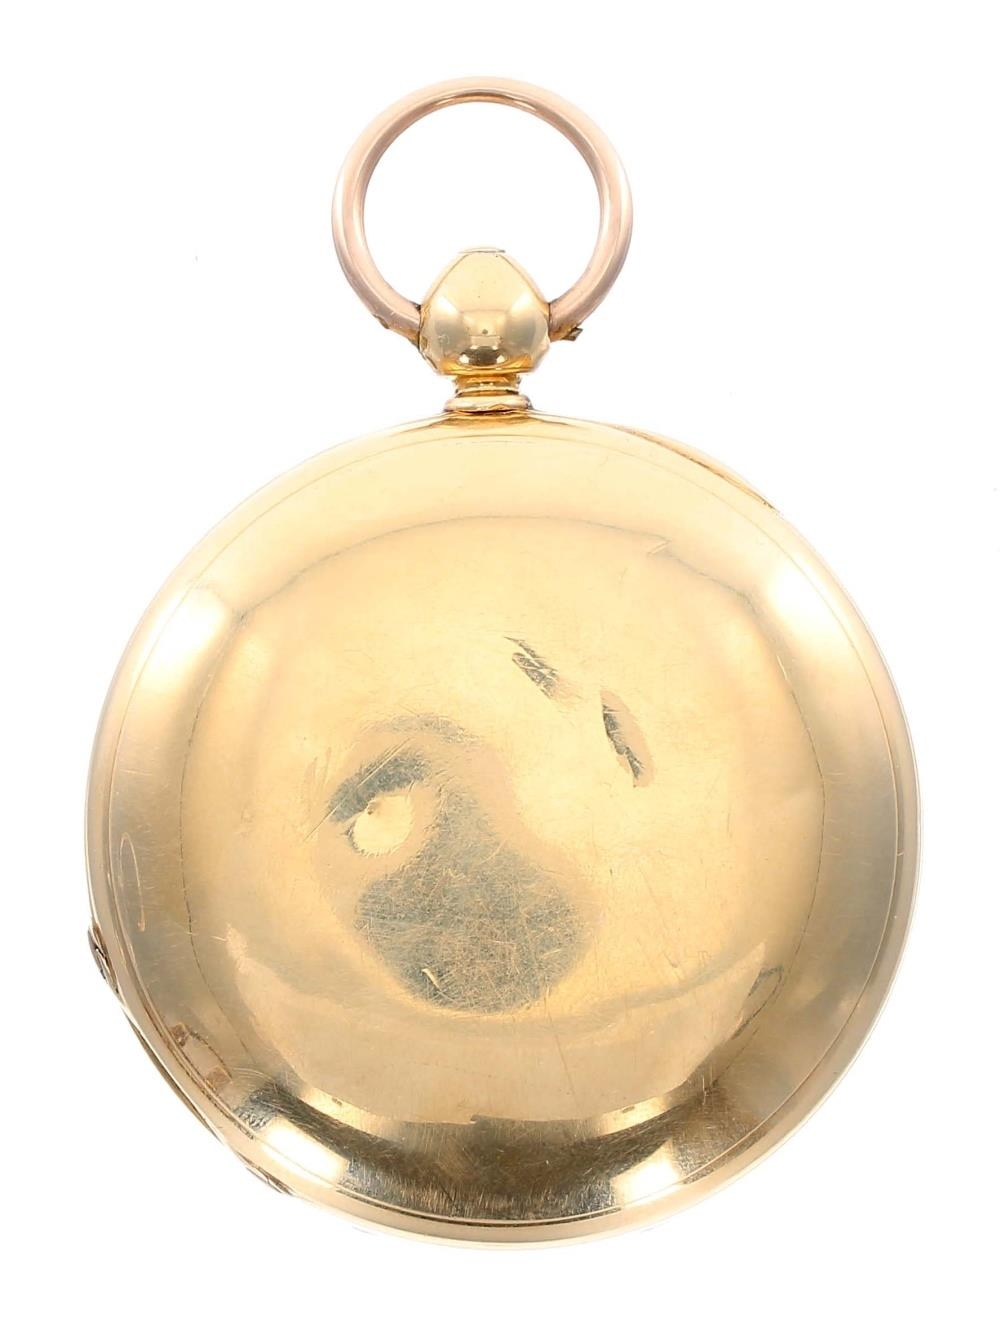 19th century 18k fusee lever hunter pocket watch, the movement signed Thos Blundell, Liverpool, - Image 3 of 4